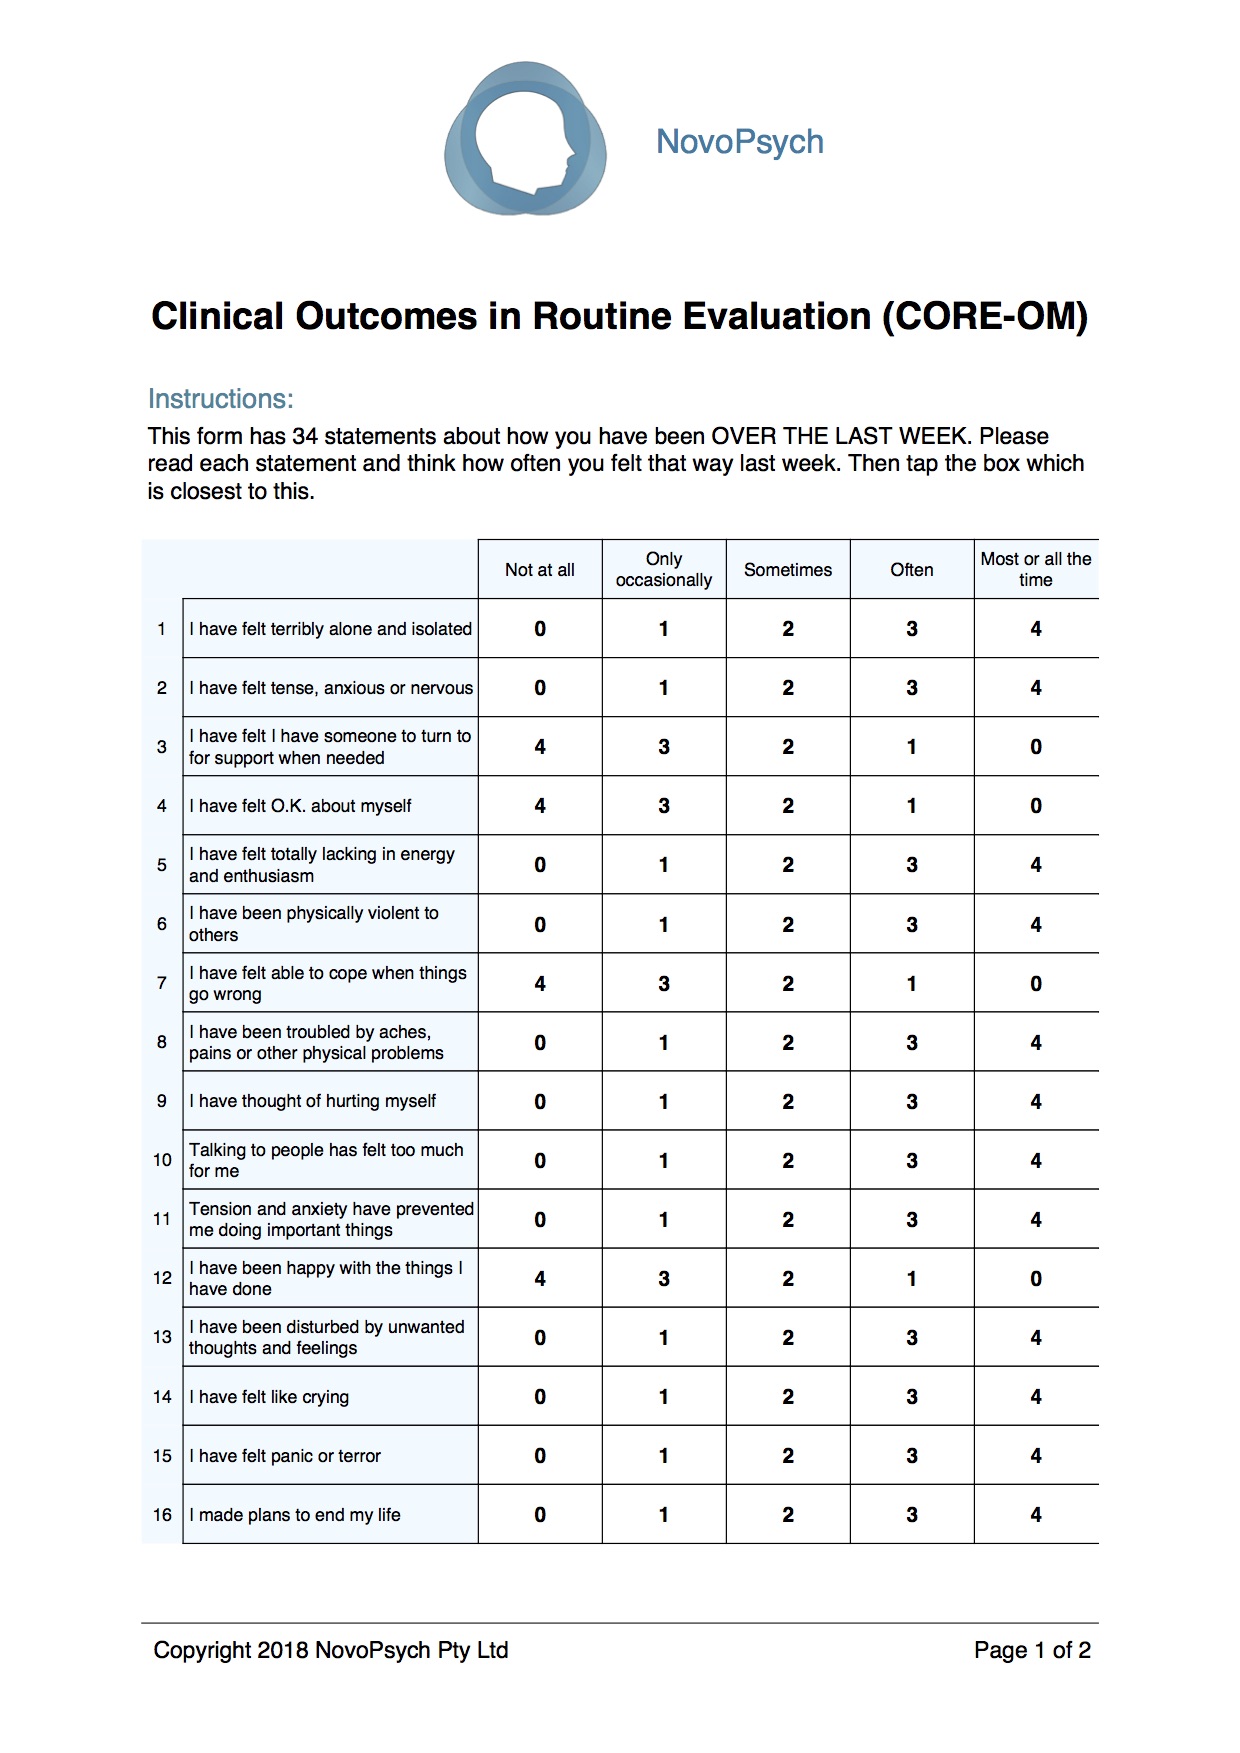 Clinical Outcomes in Routine Evaluation (CORE-OM) – NovoPsych